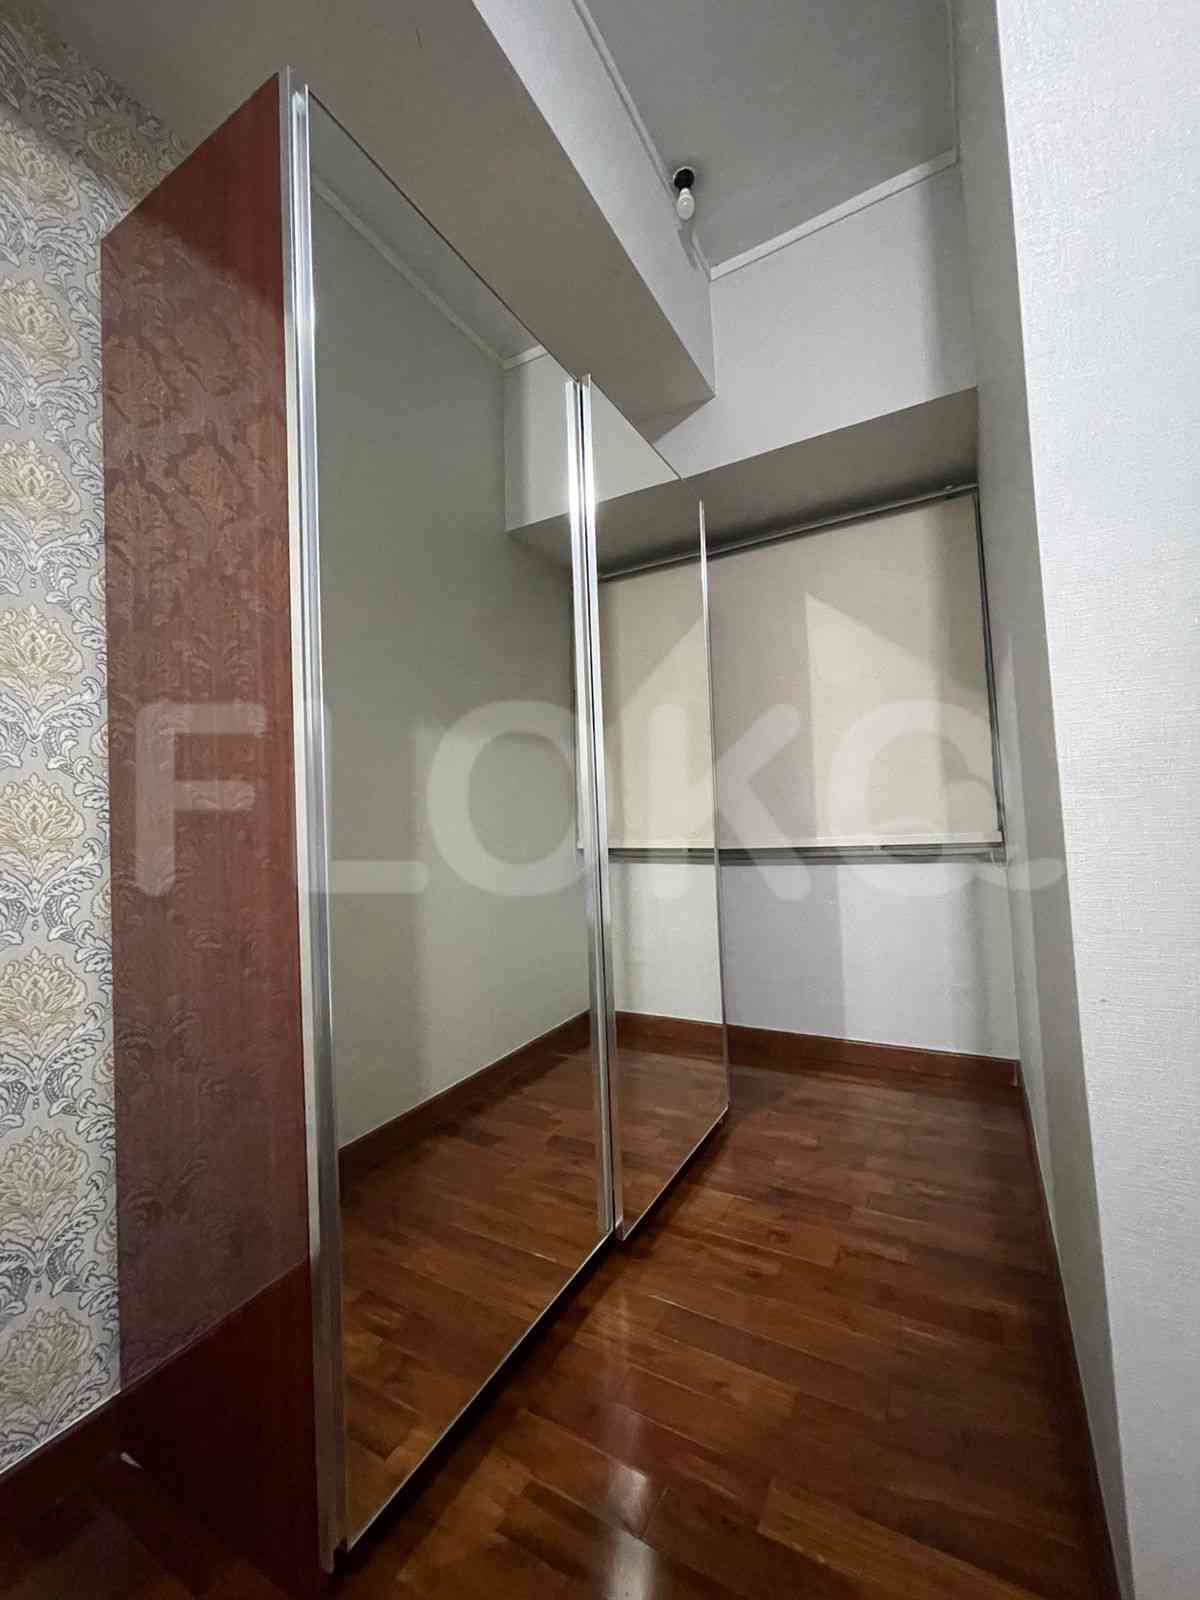 2 Bedroom on 18th Floor for Rent in Seasons City Apartment - fgr682 12